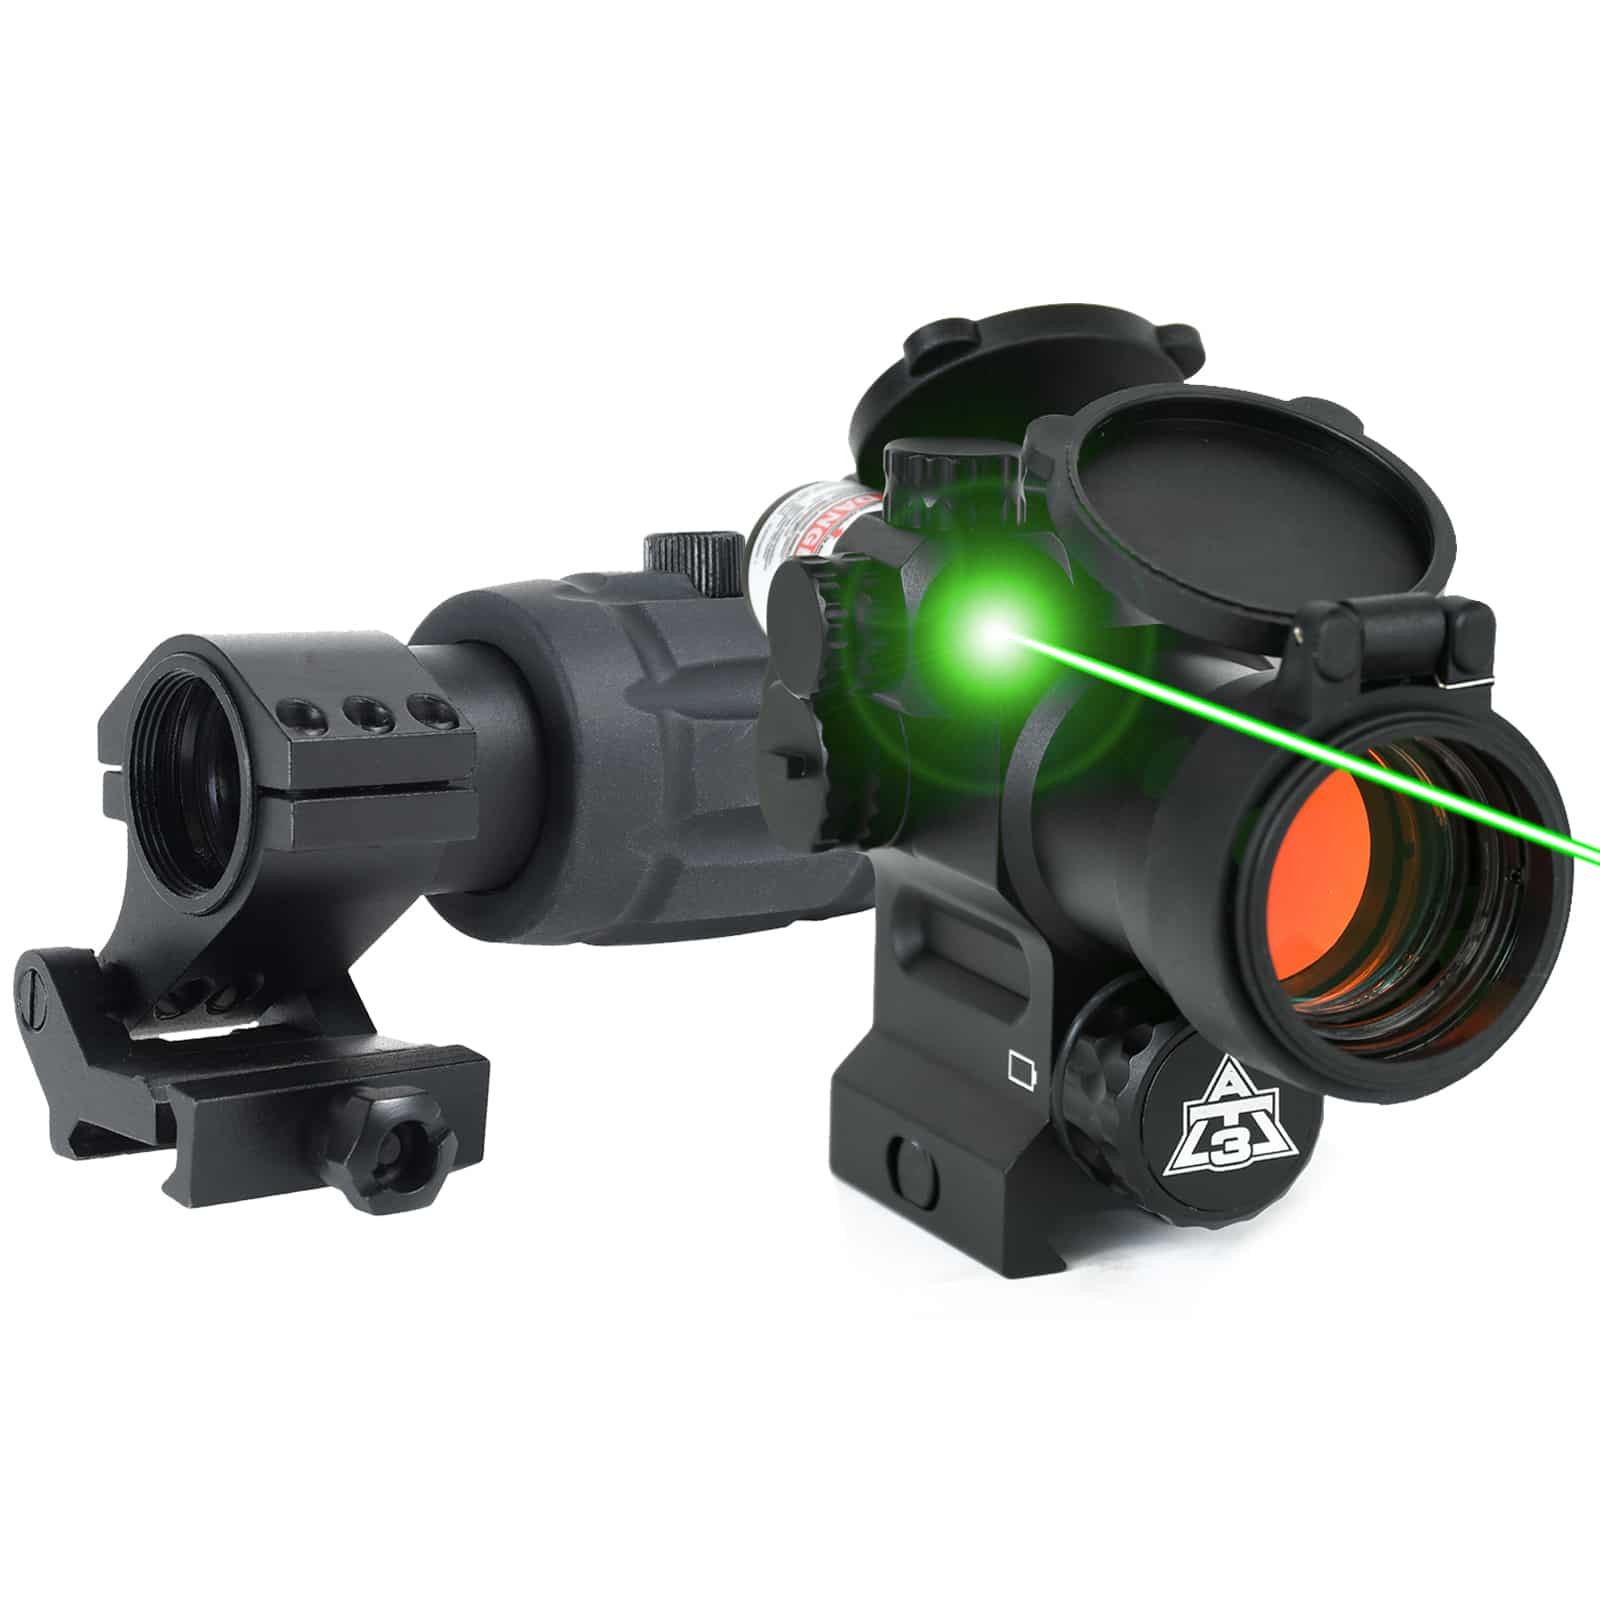 AT3™ Magnified Red Dot with Laser Sight Kit – AT3 LEOS & RRDM 3x Magnifier